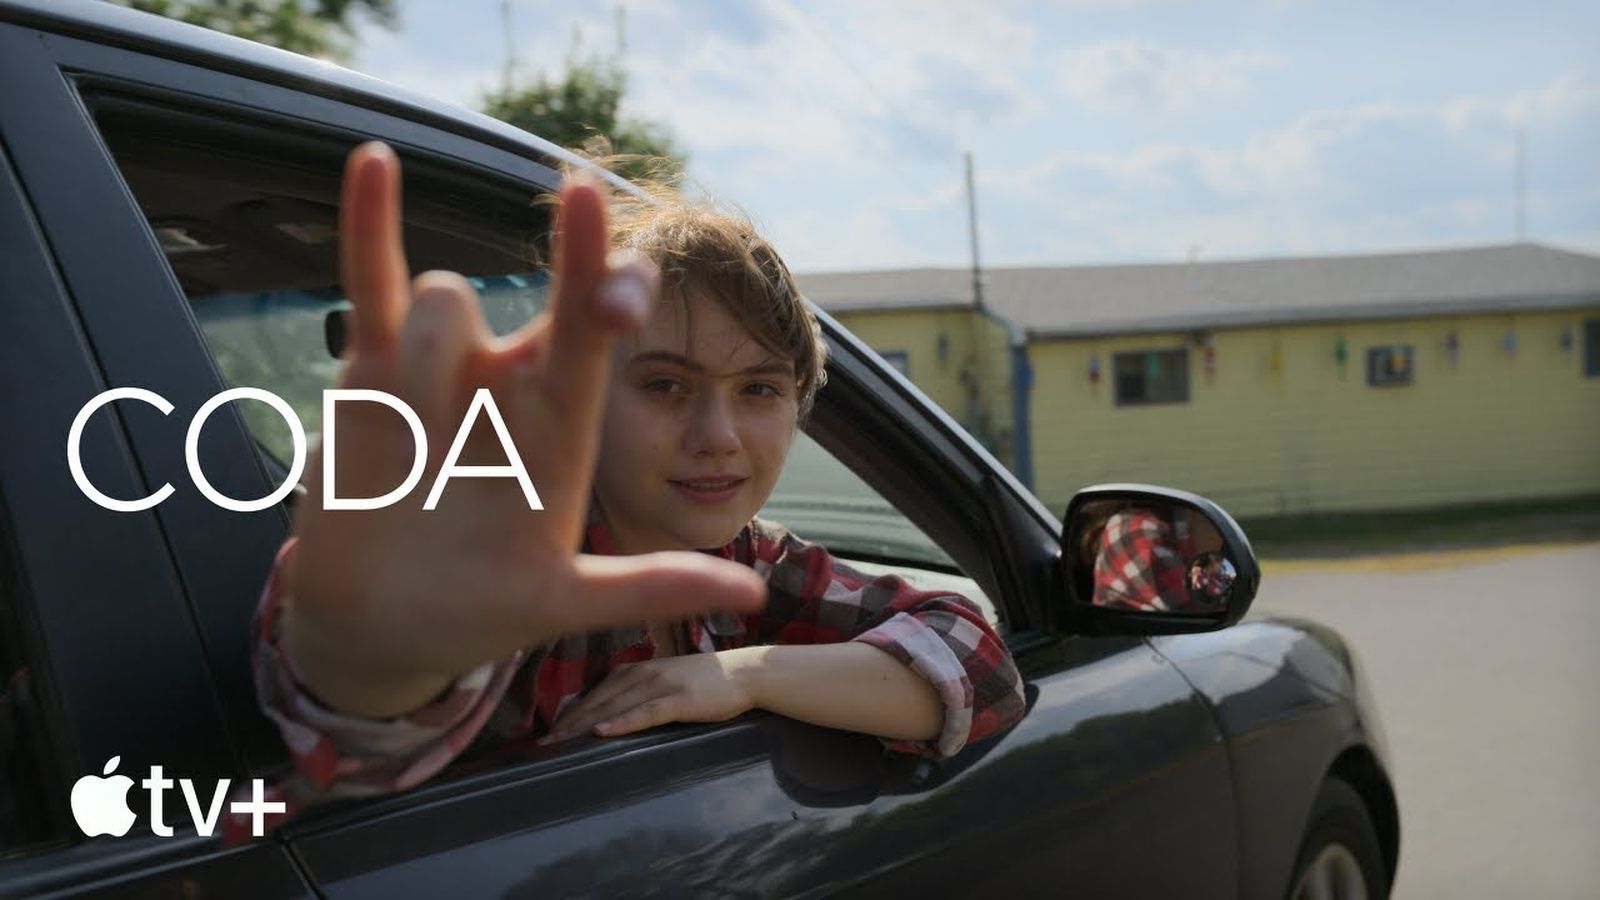 Oscar Nominated Apple TV+ Movie 'CODA' Releasing in Theaters for Free